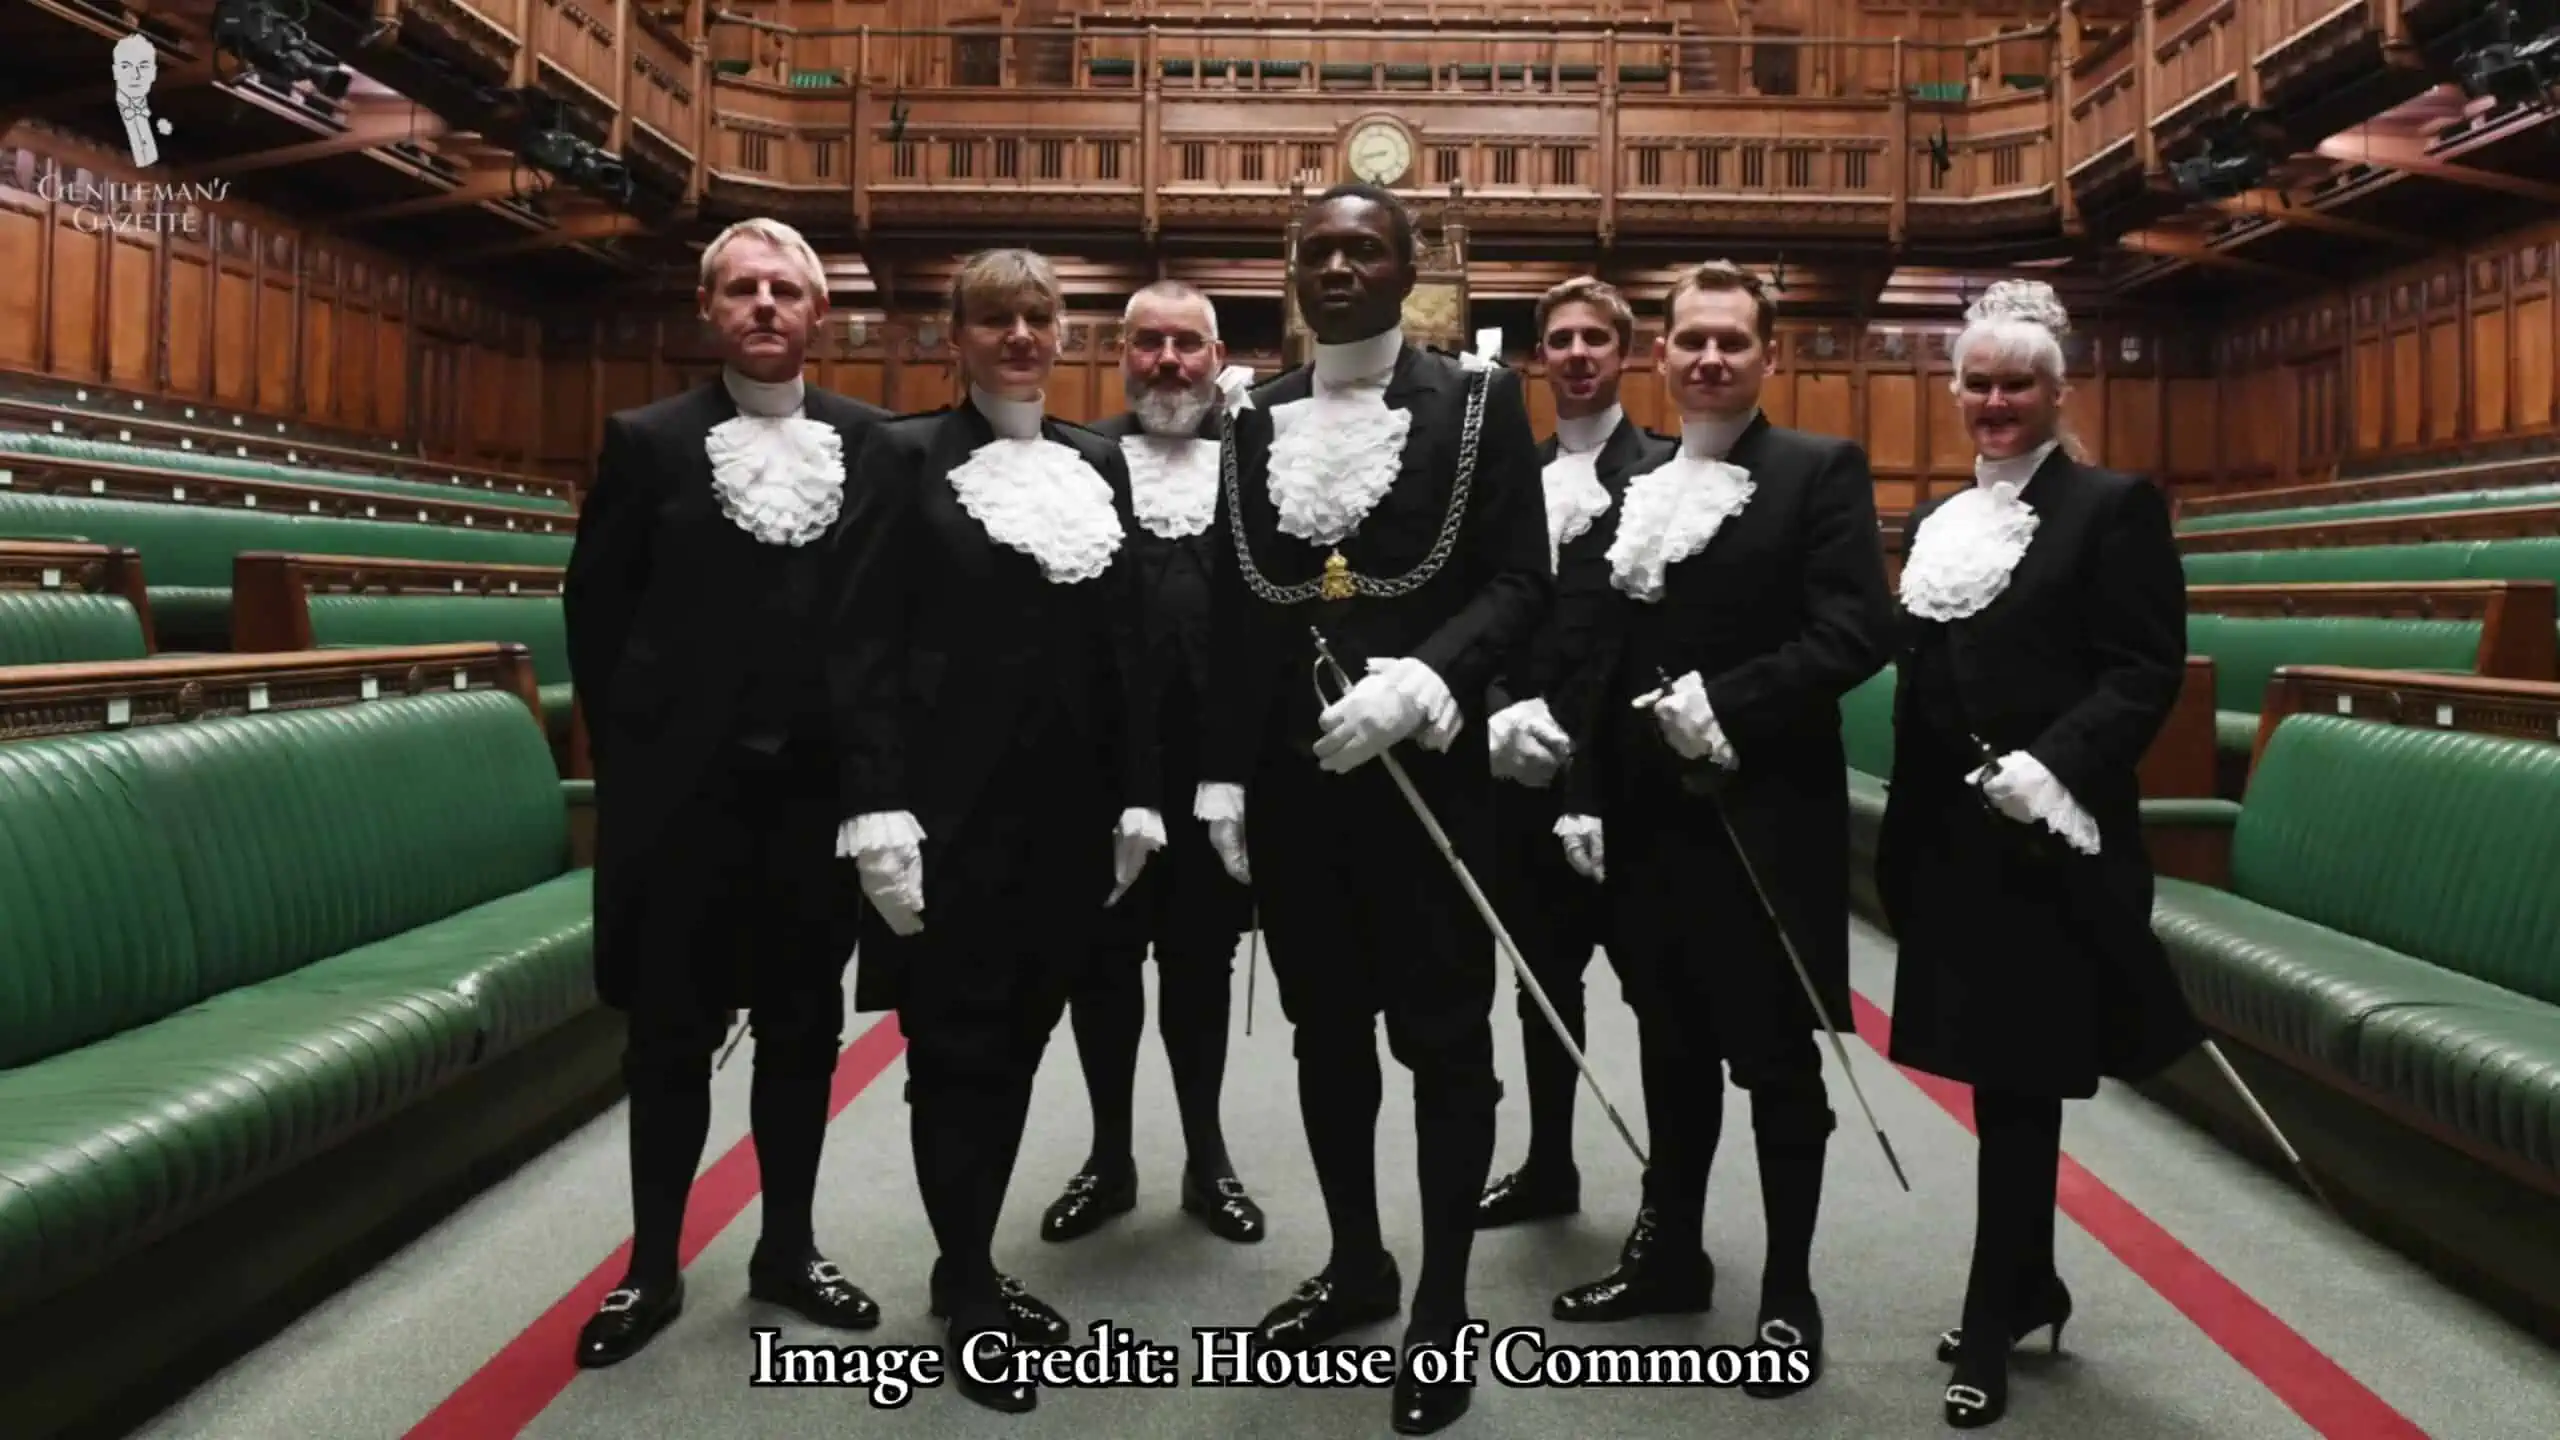 Breeches are being worn as court uniforms in Britain.